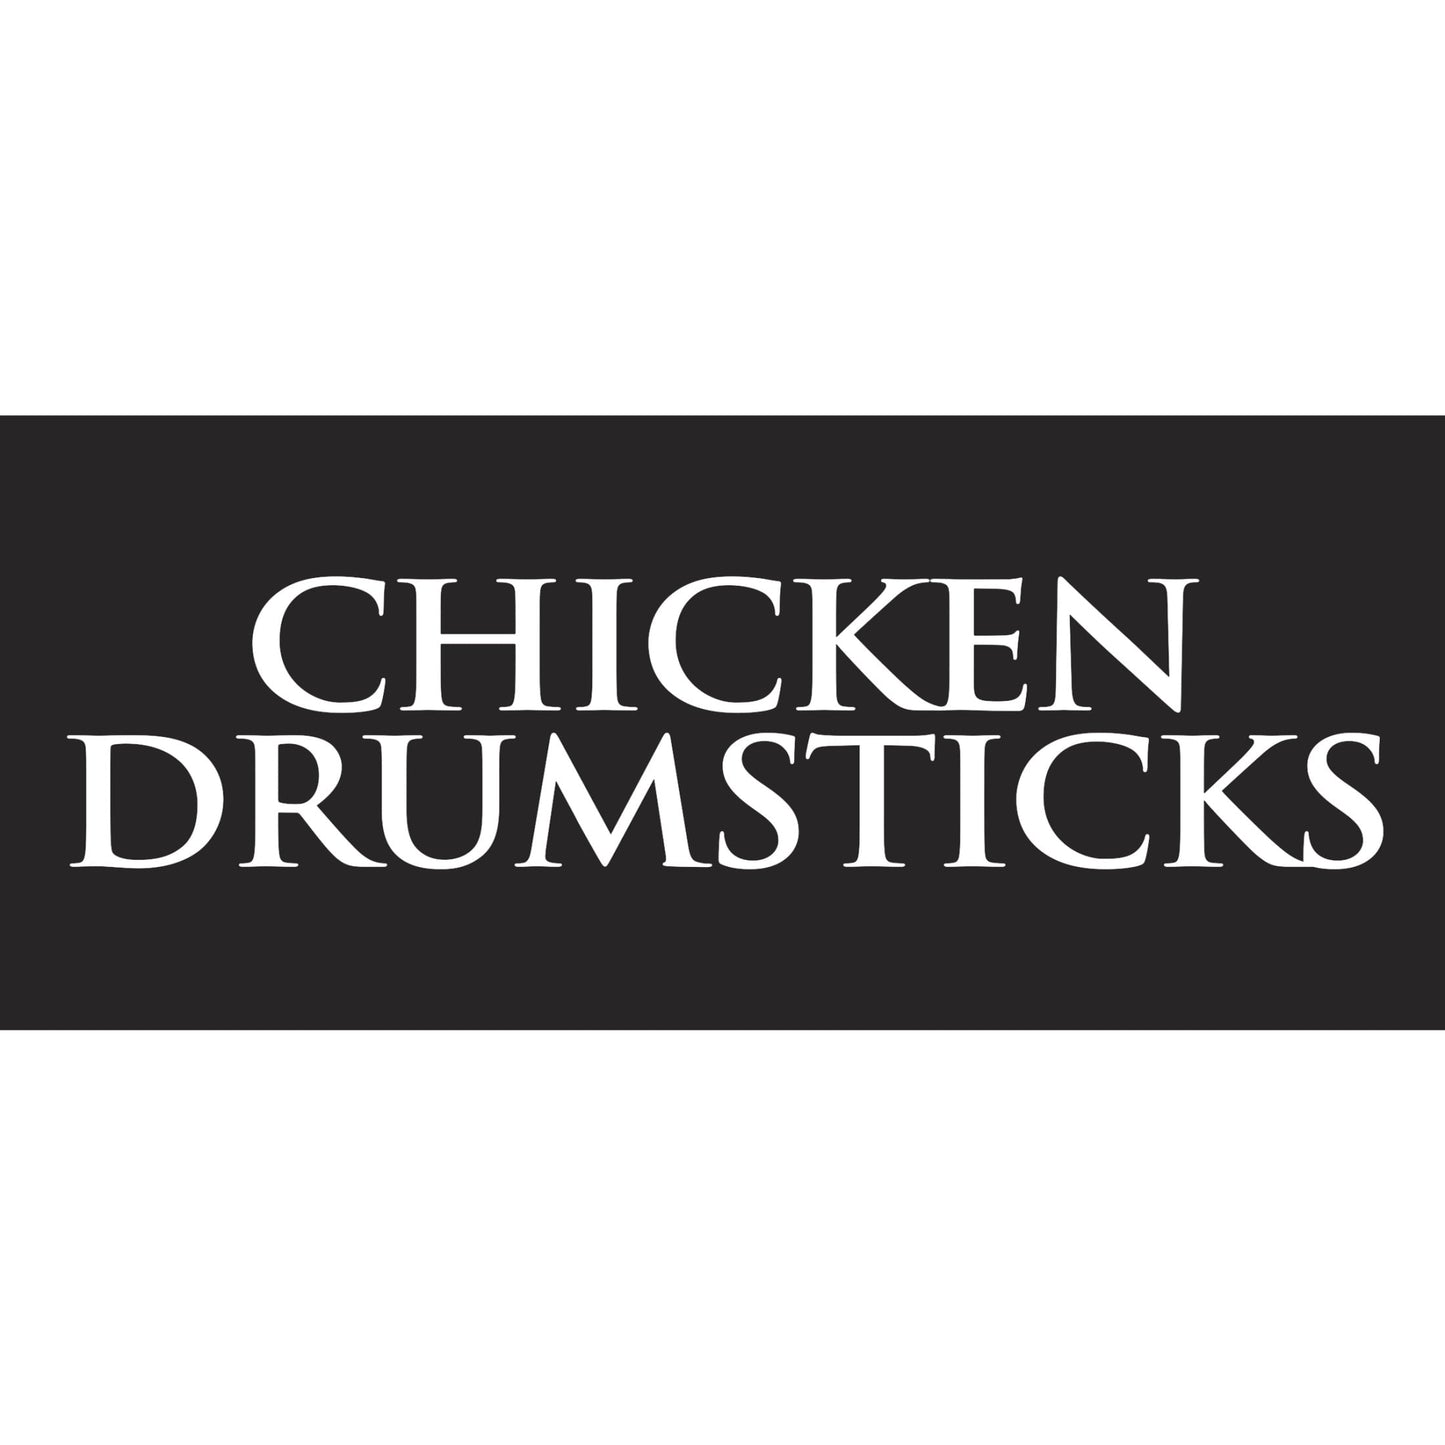 Tyson All Natural, Fresh Chicken Drumsticks, Family Pack, 4.25 - 6.7 lbs Tray, 4.25 - 6.7 lb Tray